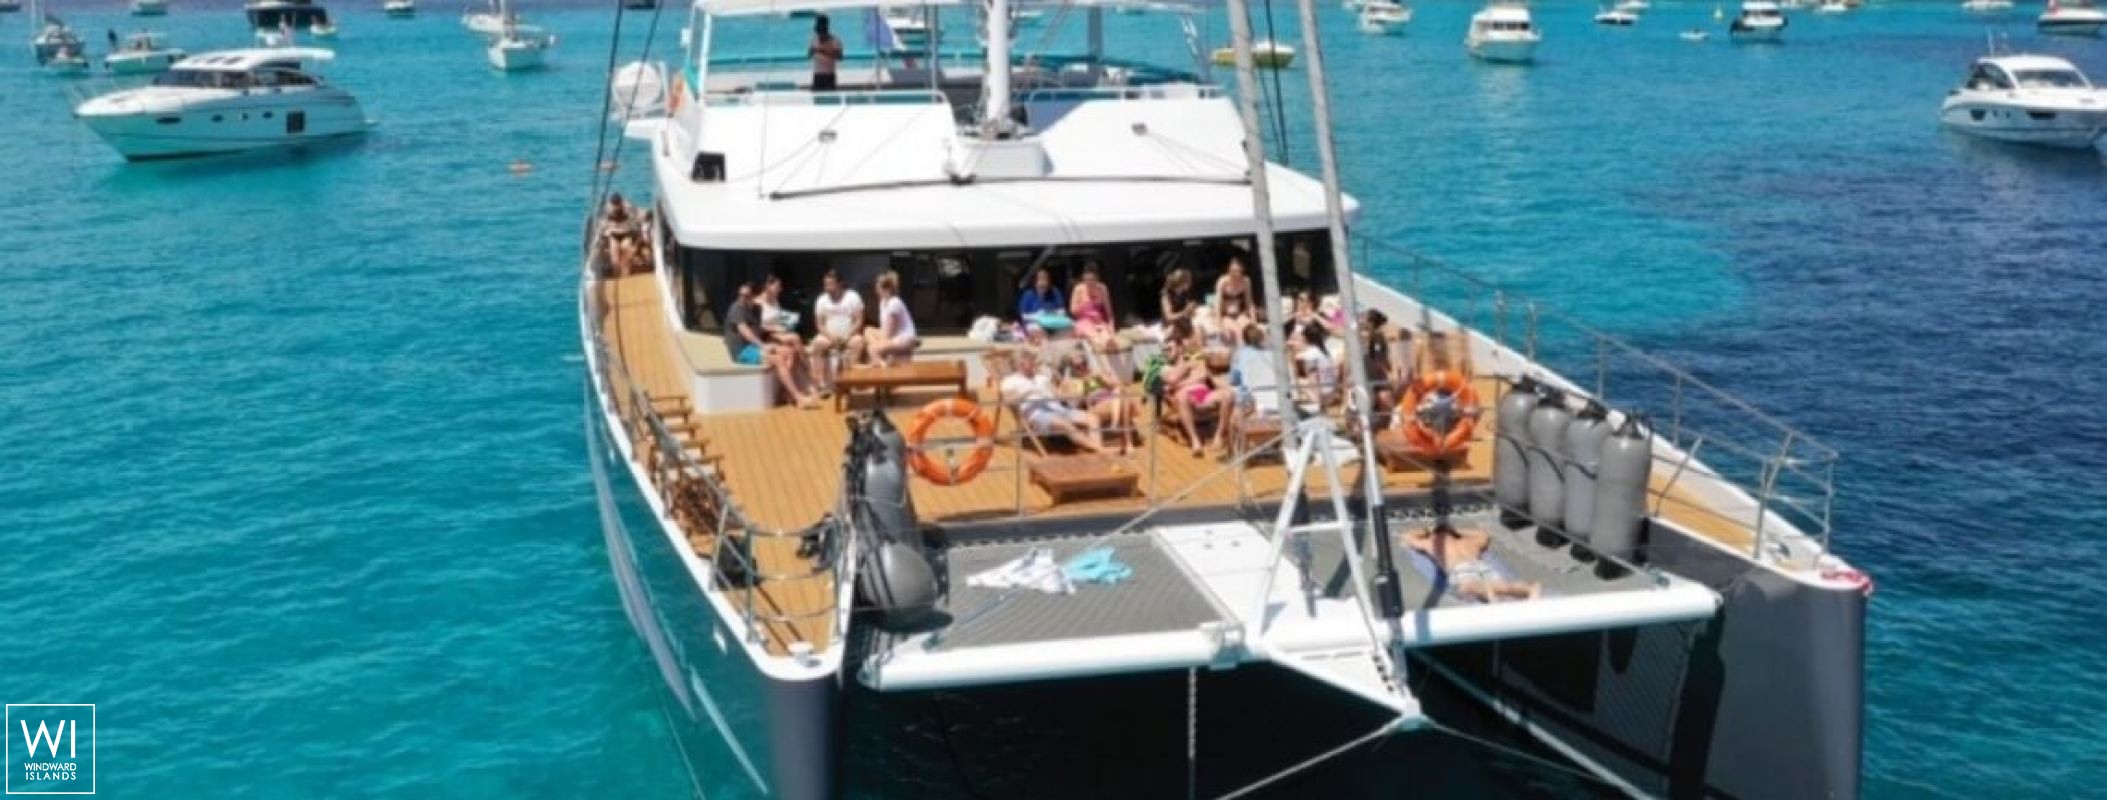 Catamaran Catamaran 25m Rivage CroisiÈre Ii Available For Day Charters Cannes French Riviera 